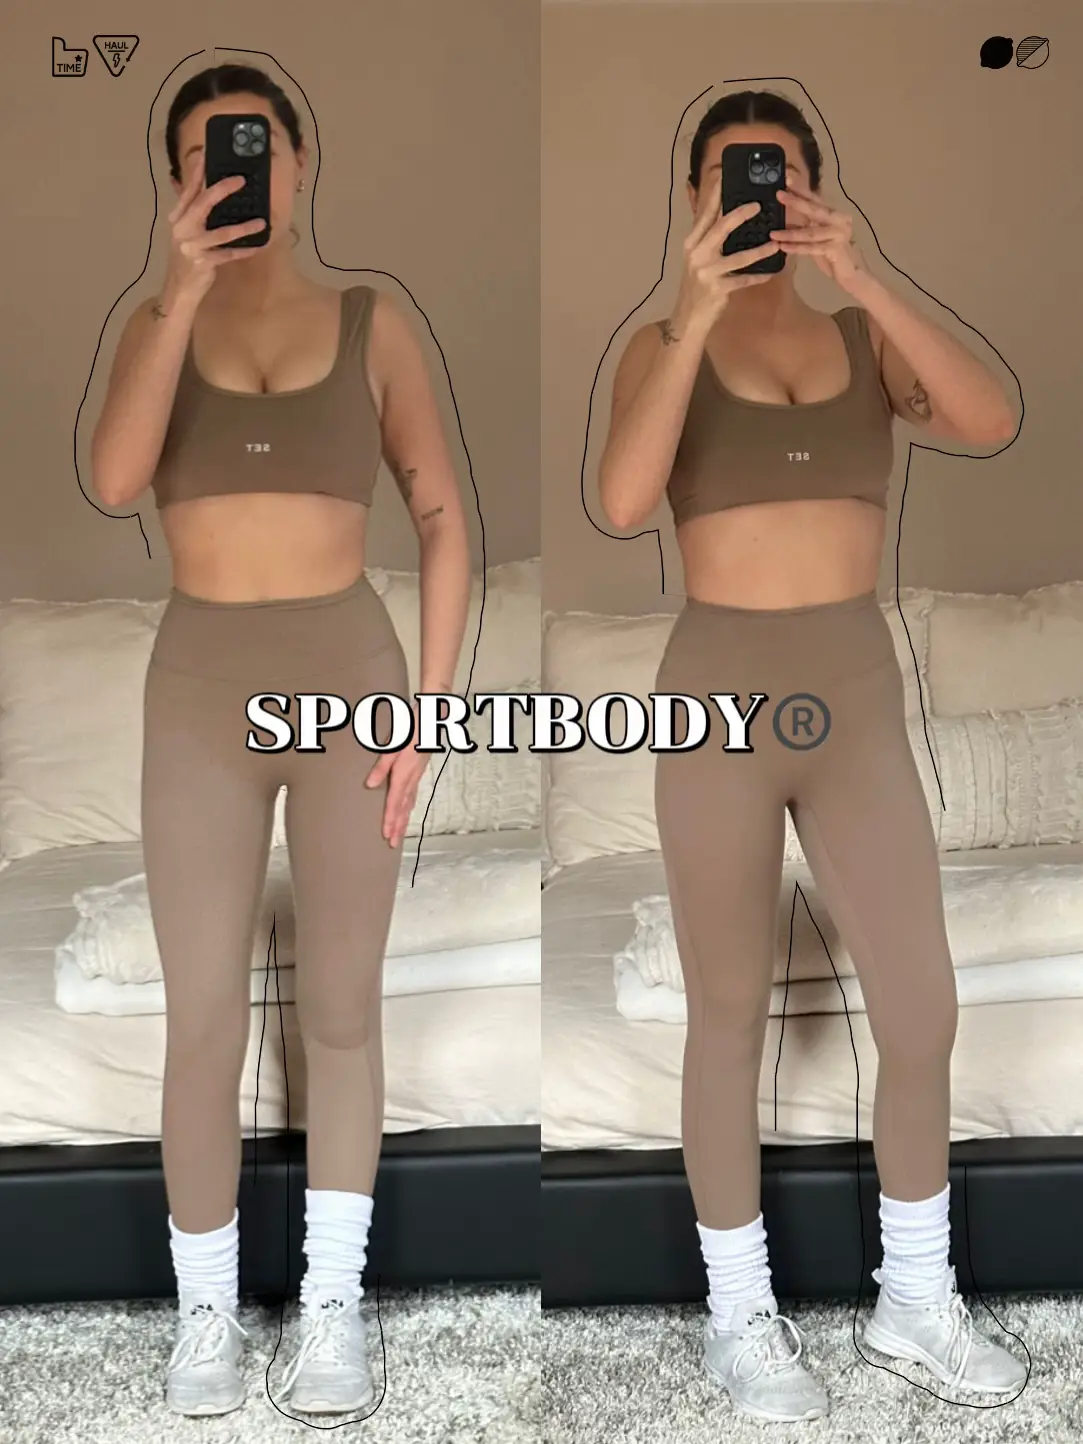 SET ACTIVE TRY ON HAUL AND REVIEW (LUXFORM VS SCULPTFLEX) IS SET ACTIVE  WORTH THE MONEY?